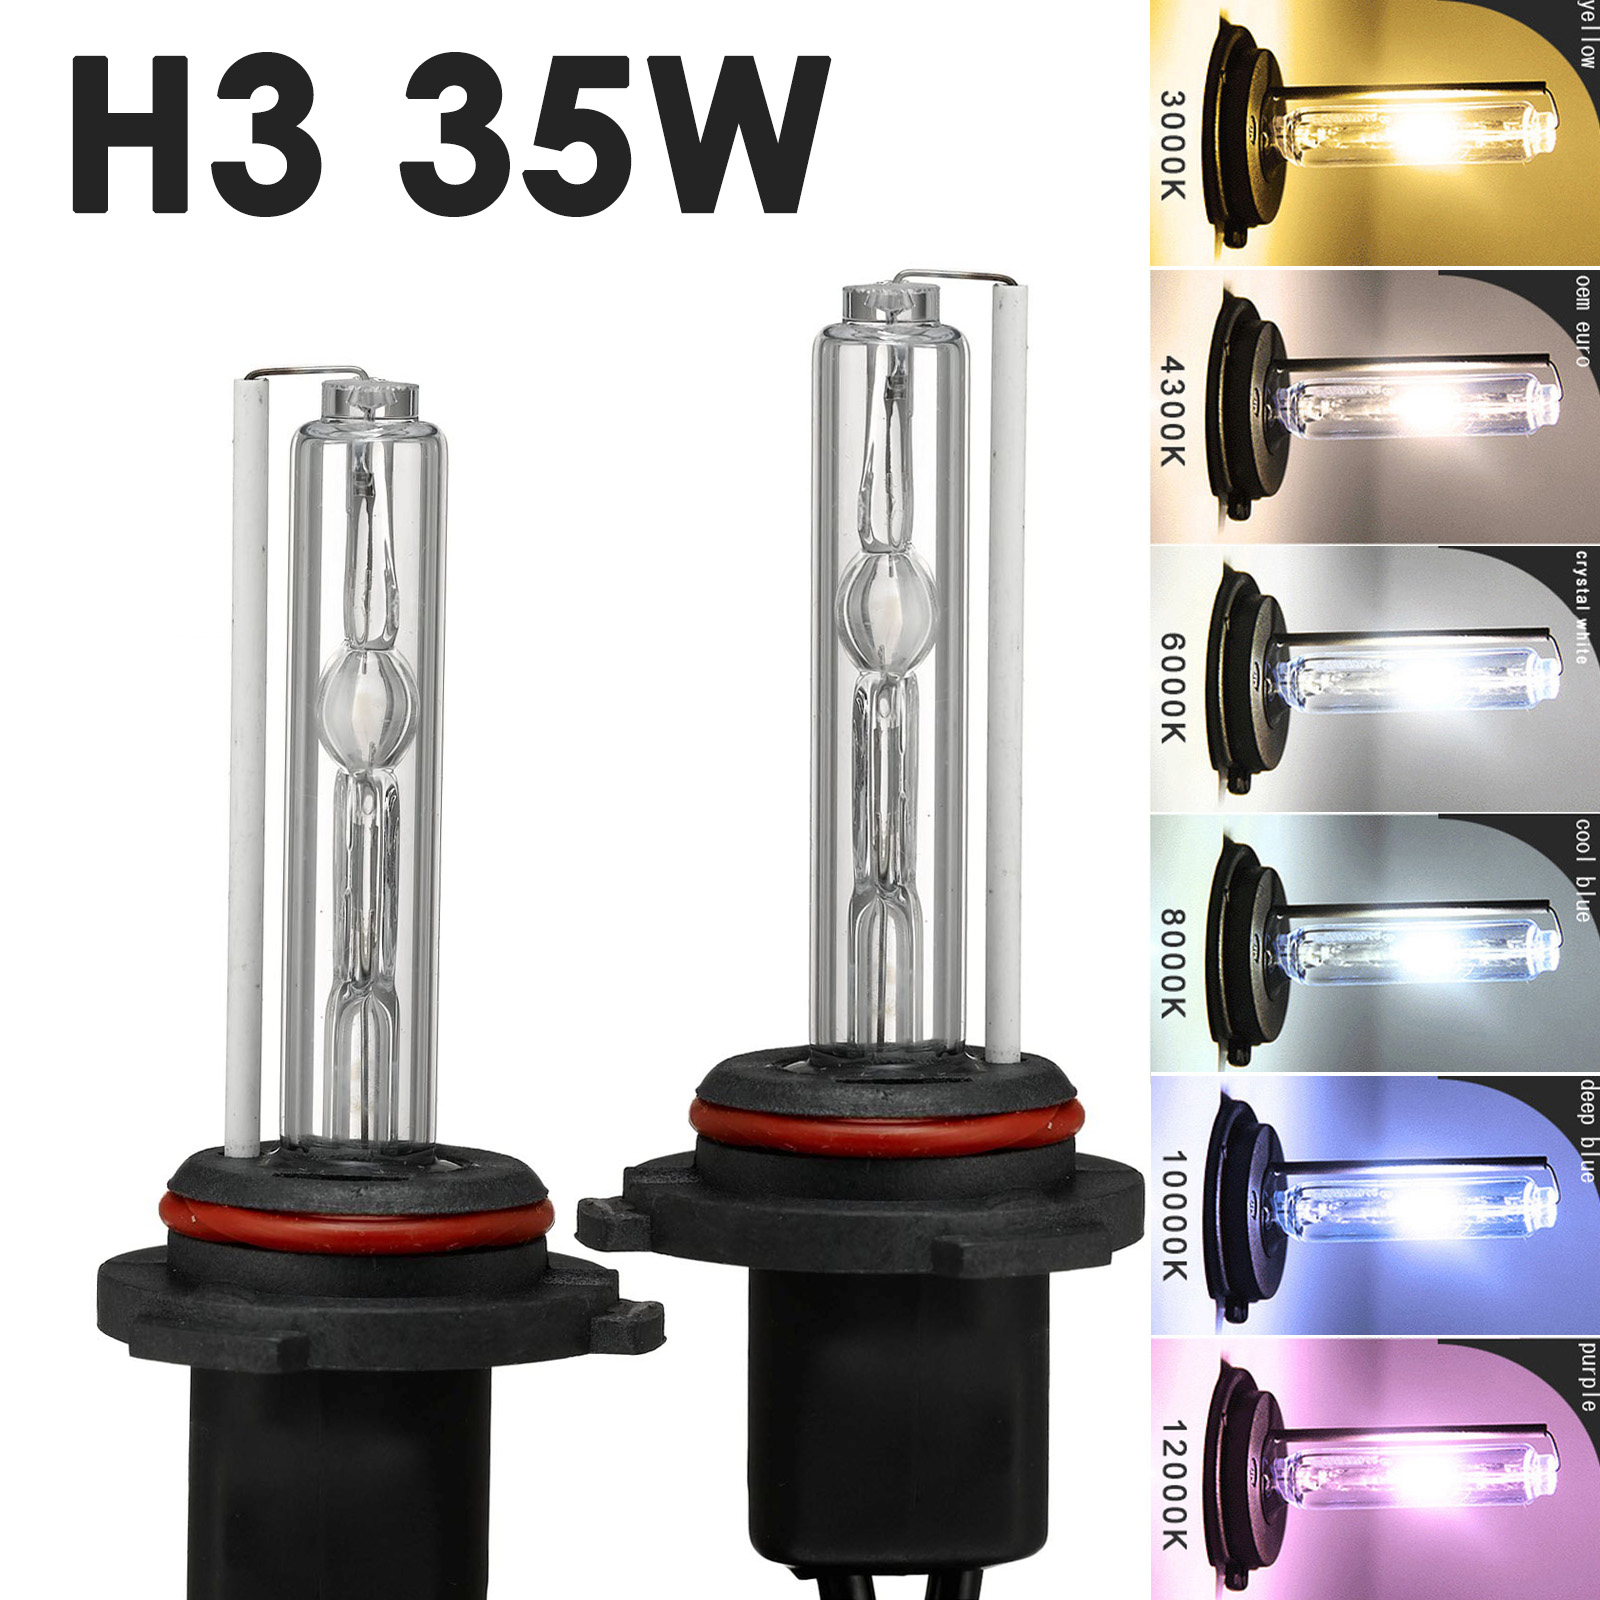 2x XENON H10 9145 HID Bulbs AC 35W Fog Light Replacement Wire adapter All Color